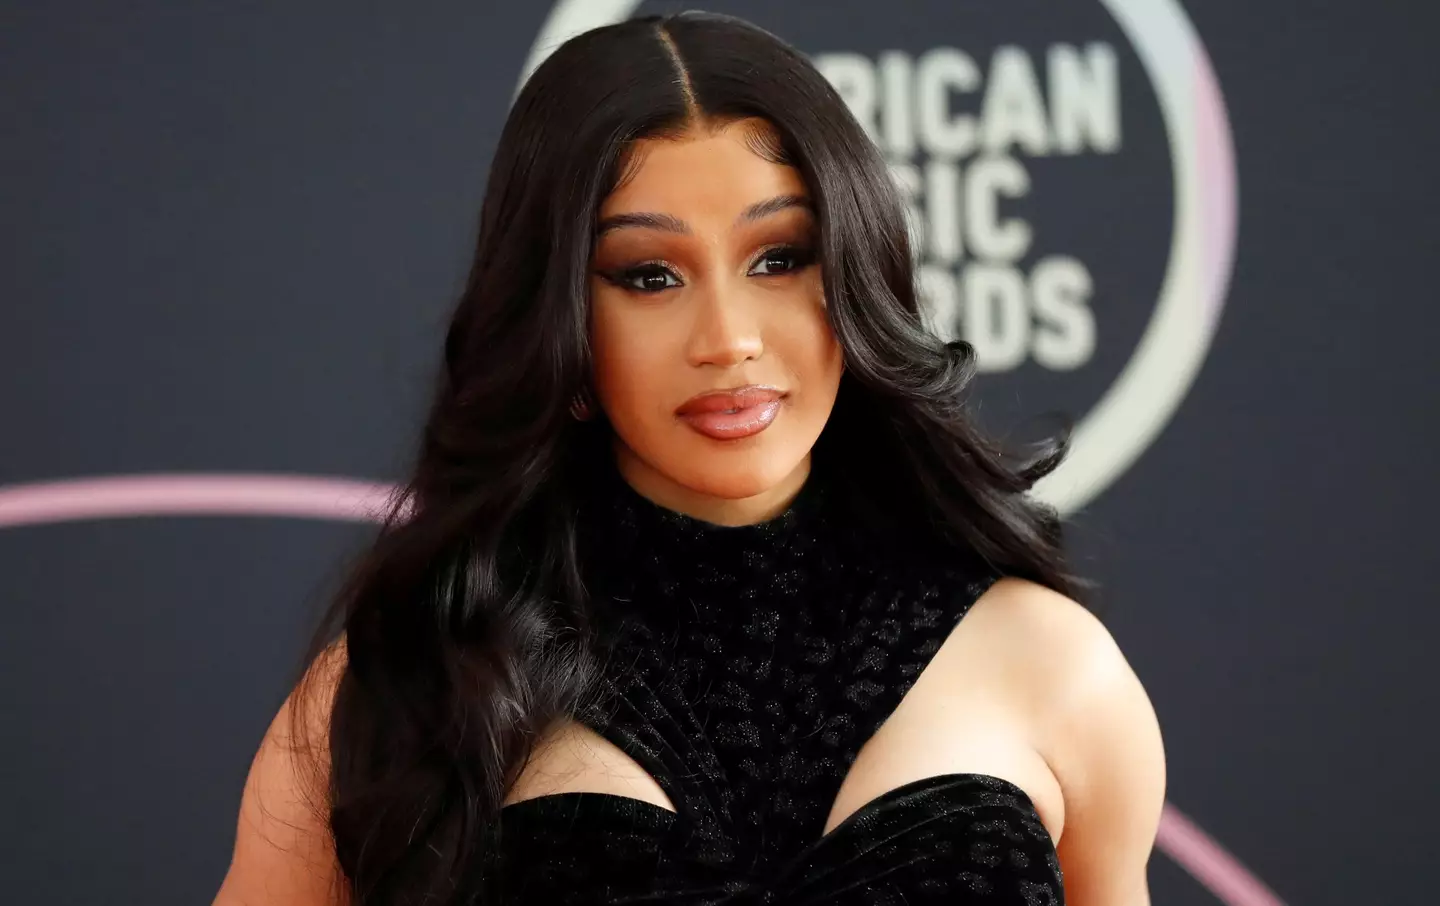 Cardi B wants to know what help will be out there for people who don't have wealthy friends.